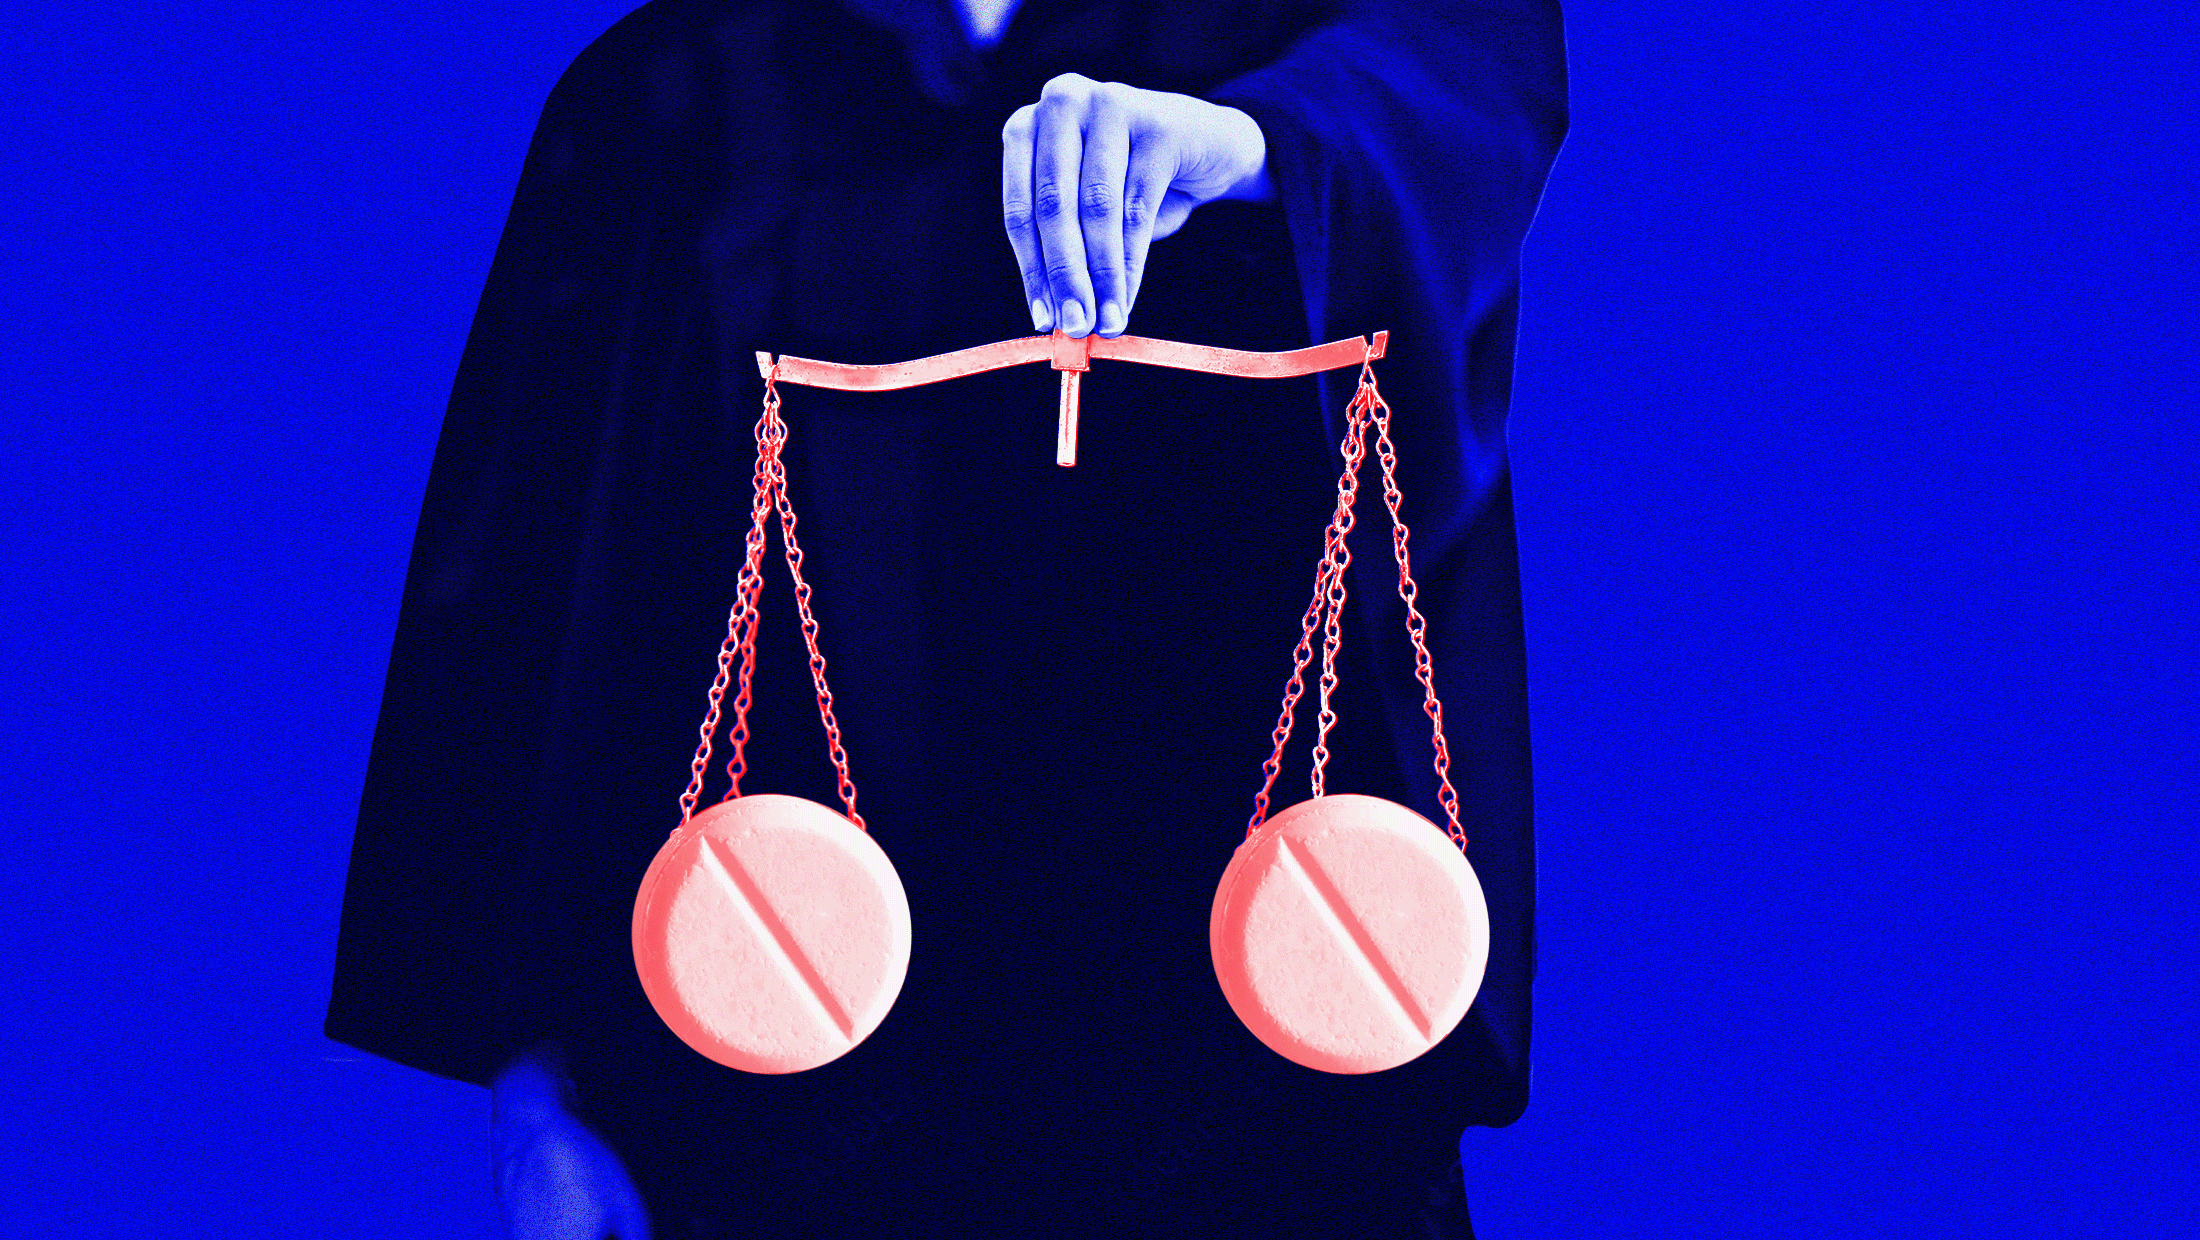 Blue background with image of Supreme Court justice holding a red-toned legal scale that has a pill on either side to symbolize the abortion pill, mifepristone.